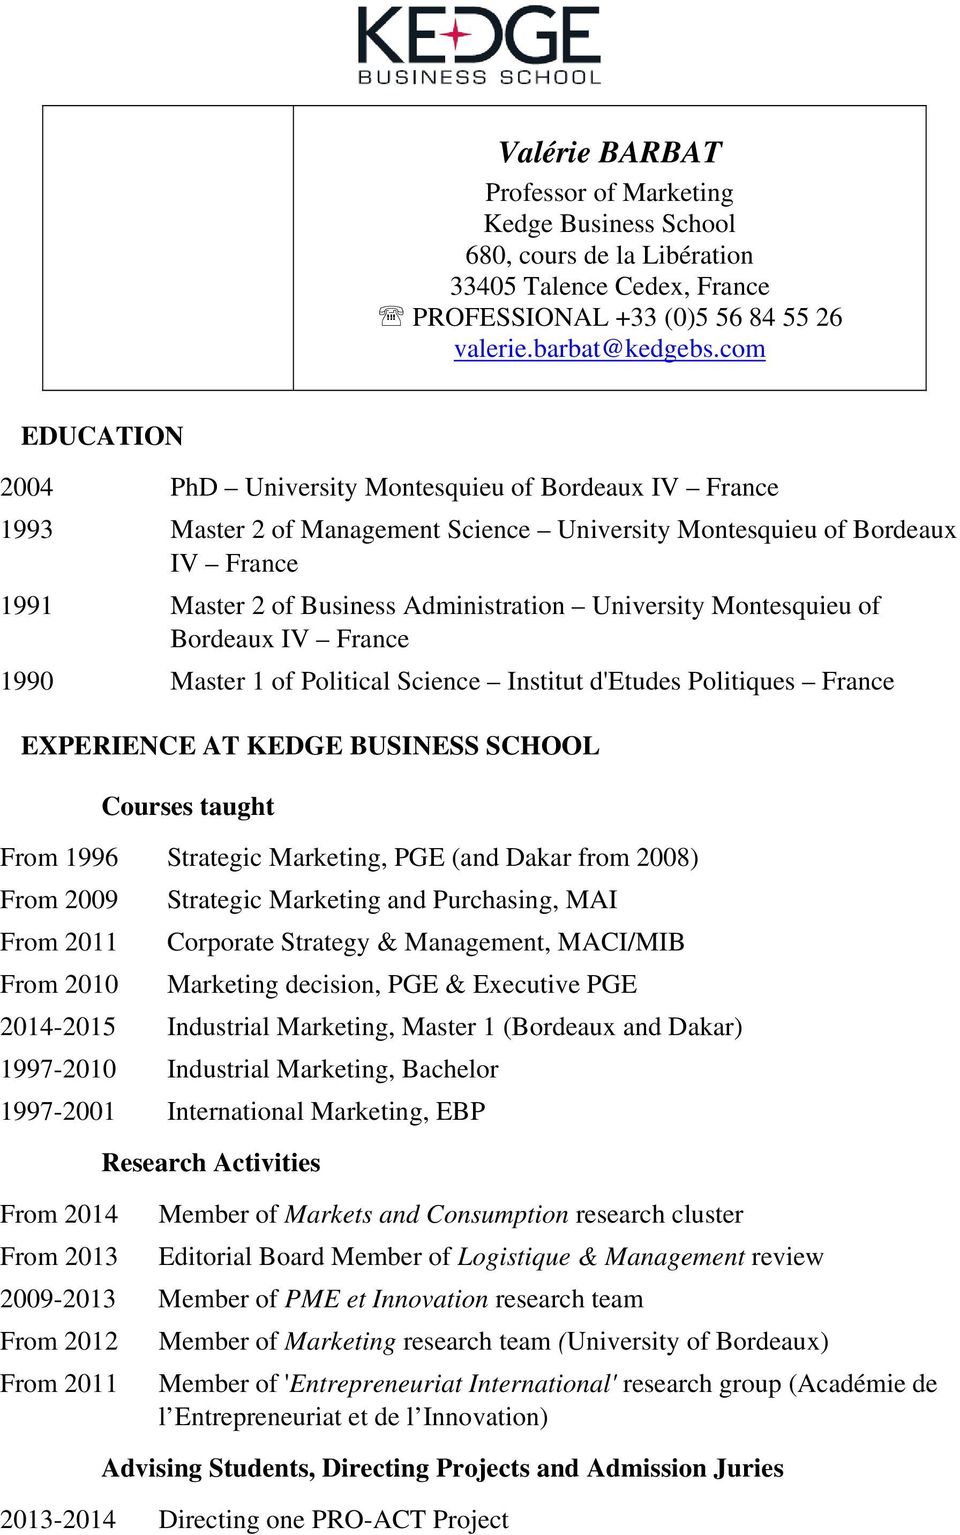 University Montesquieu of Bordeaux IV France 1990 Master 1 of Political Science Institut d'etudes Politiques France EXPERIENCE AT KEDGE BUSINESS SCHOOL Courses taught From 1996 Strategic Marketing,